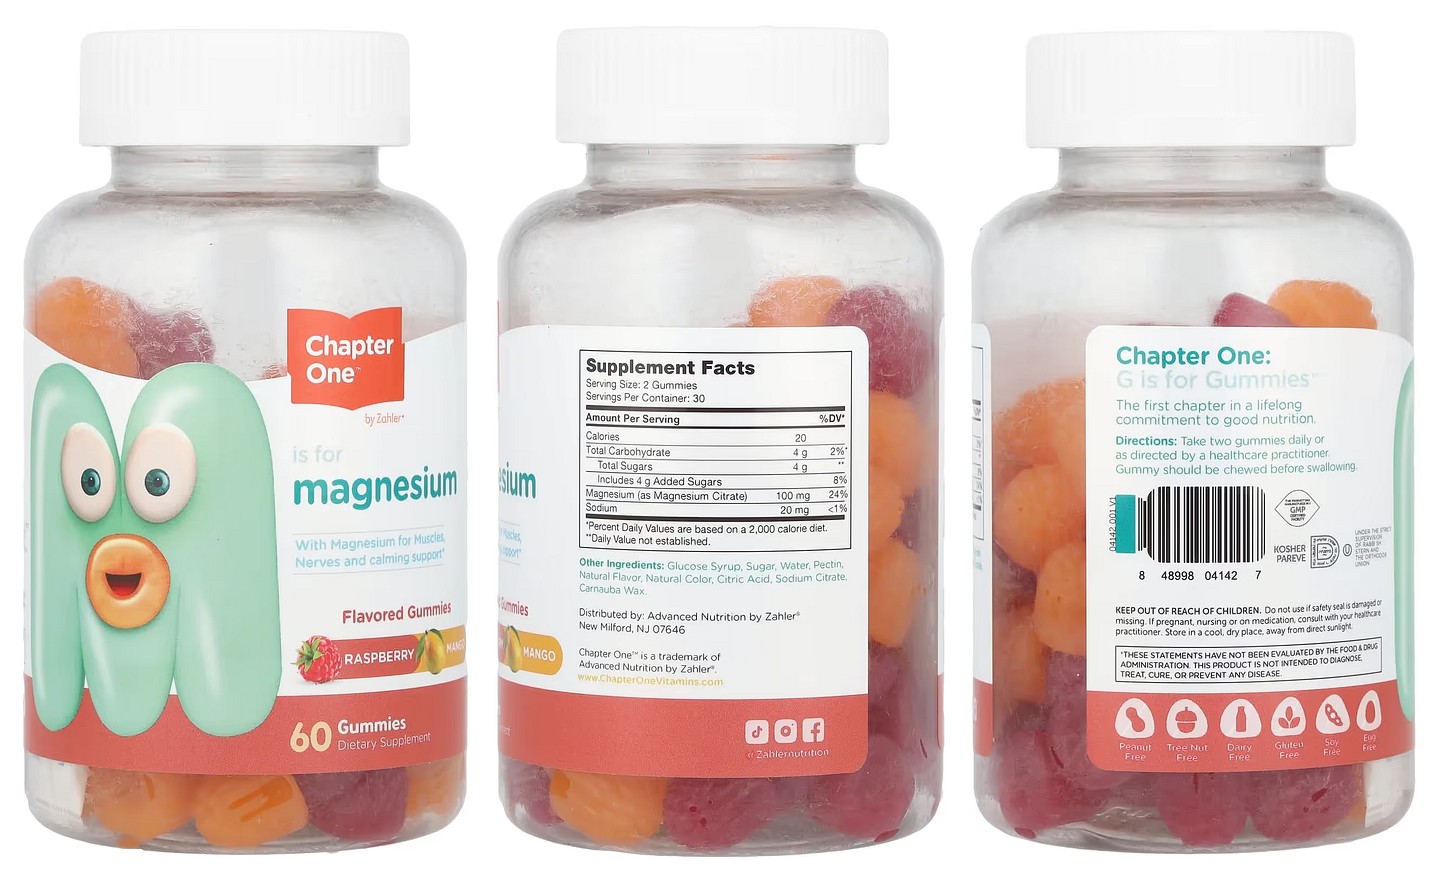 Chapter One, Magnesium Gummies packaging